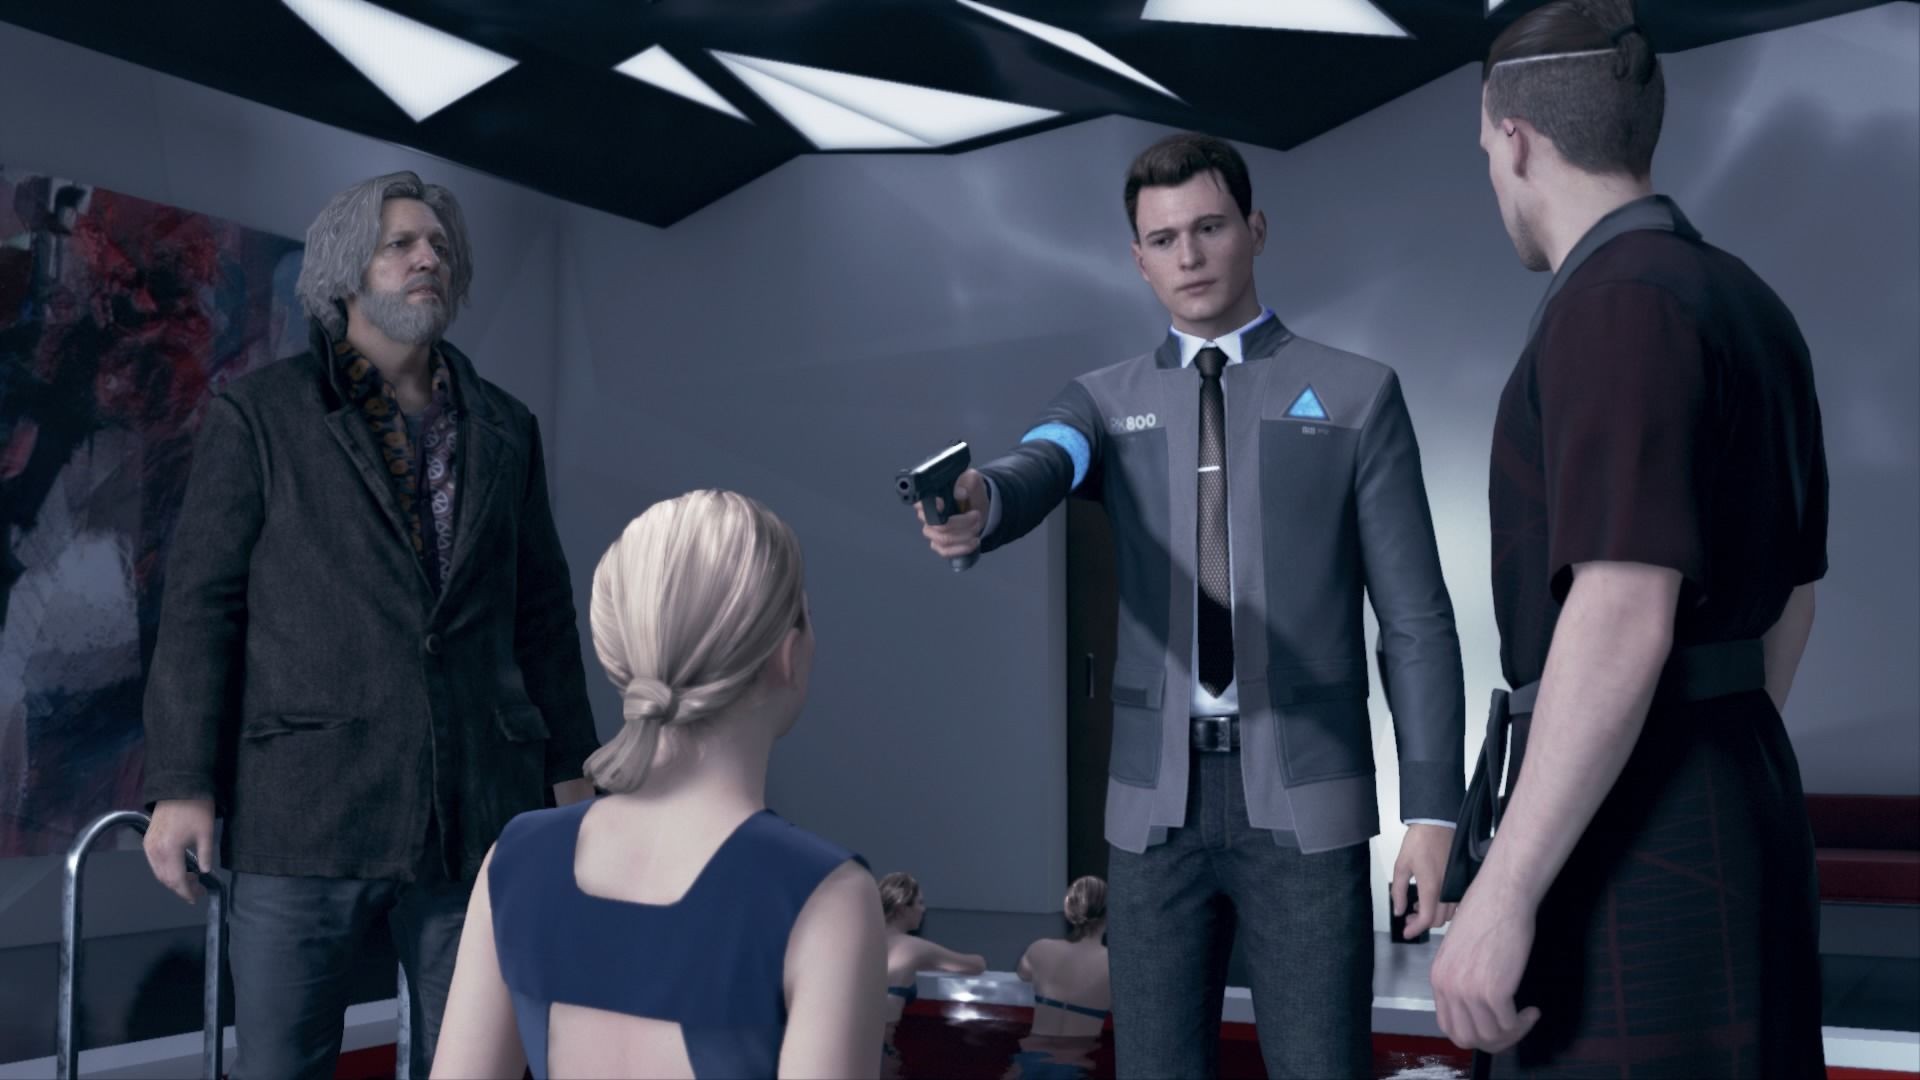 Detroit: Become Human  Download and Buy Today - Epic Games Store